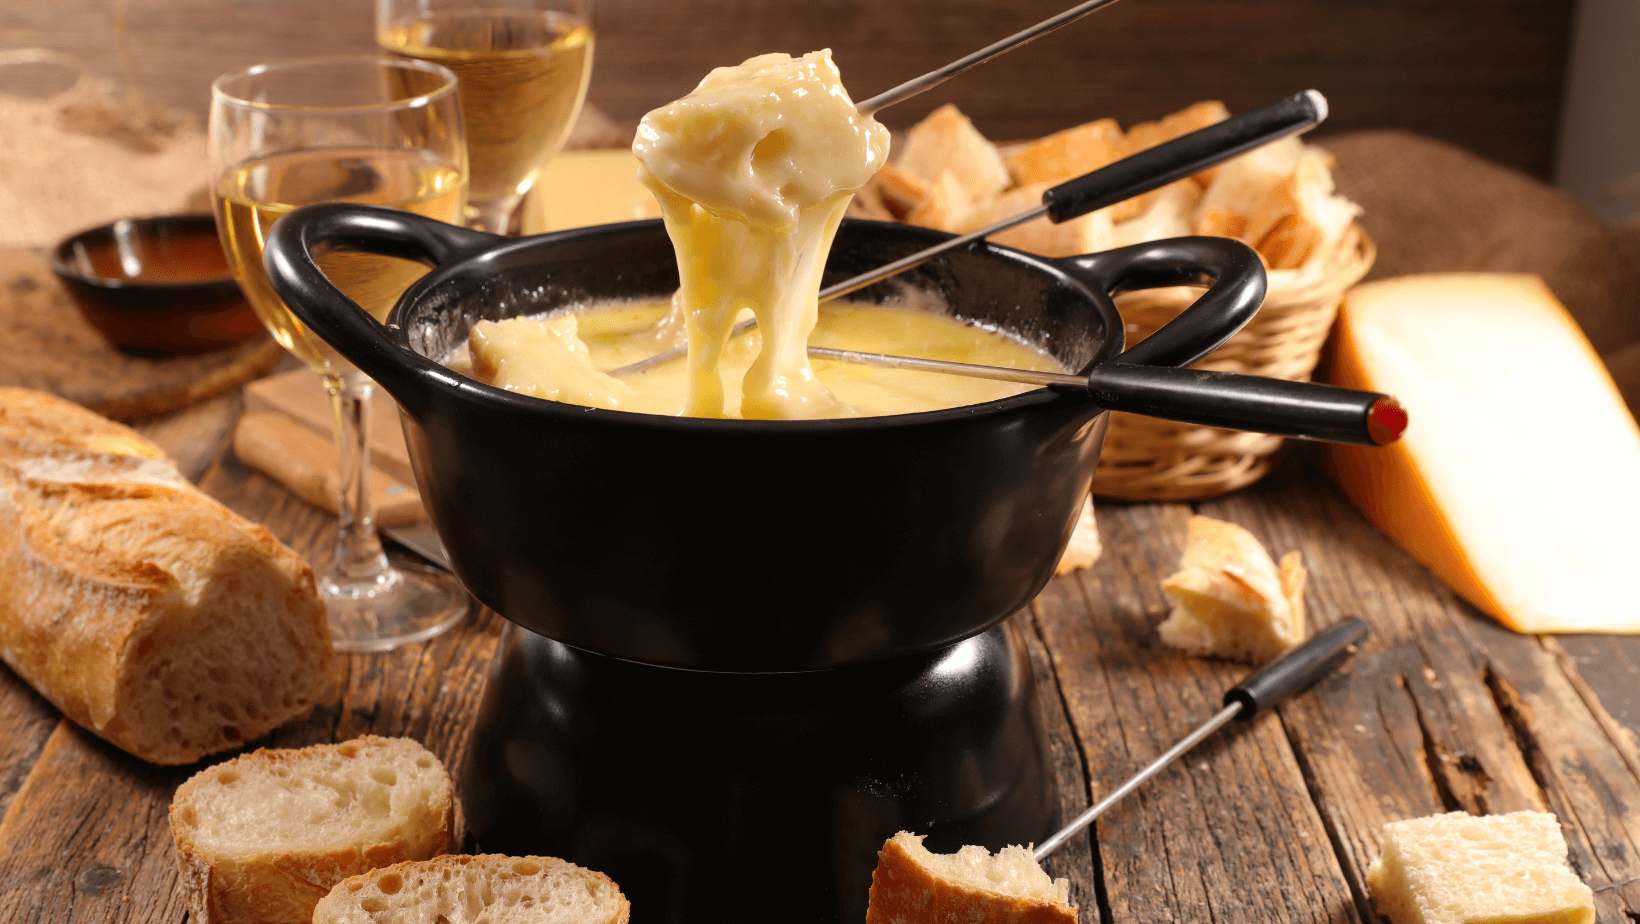 Fondue Cheese (melted cheese) in the traditional Swiss style, in a big pot with utensils for dipping of appetizers and finger foods